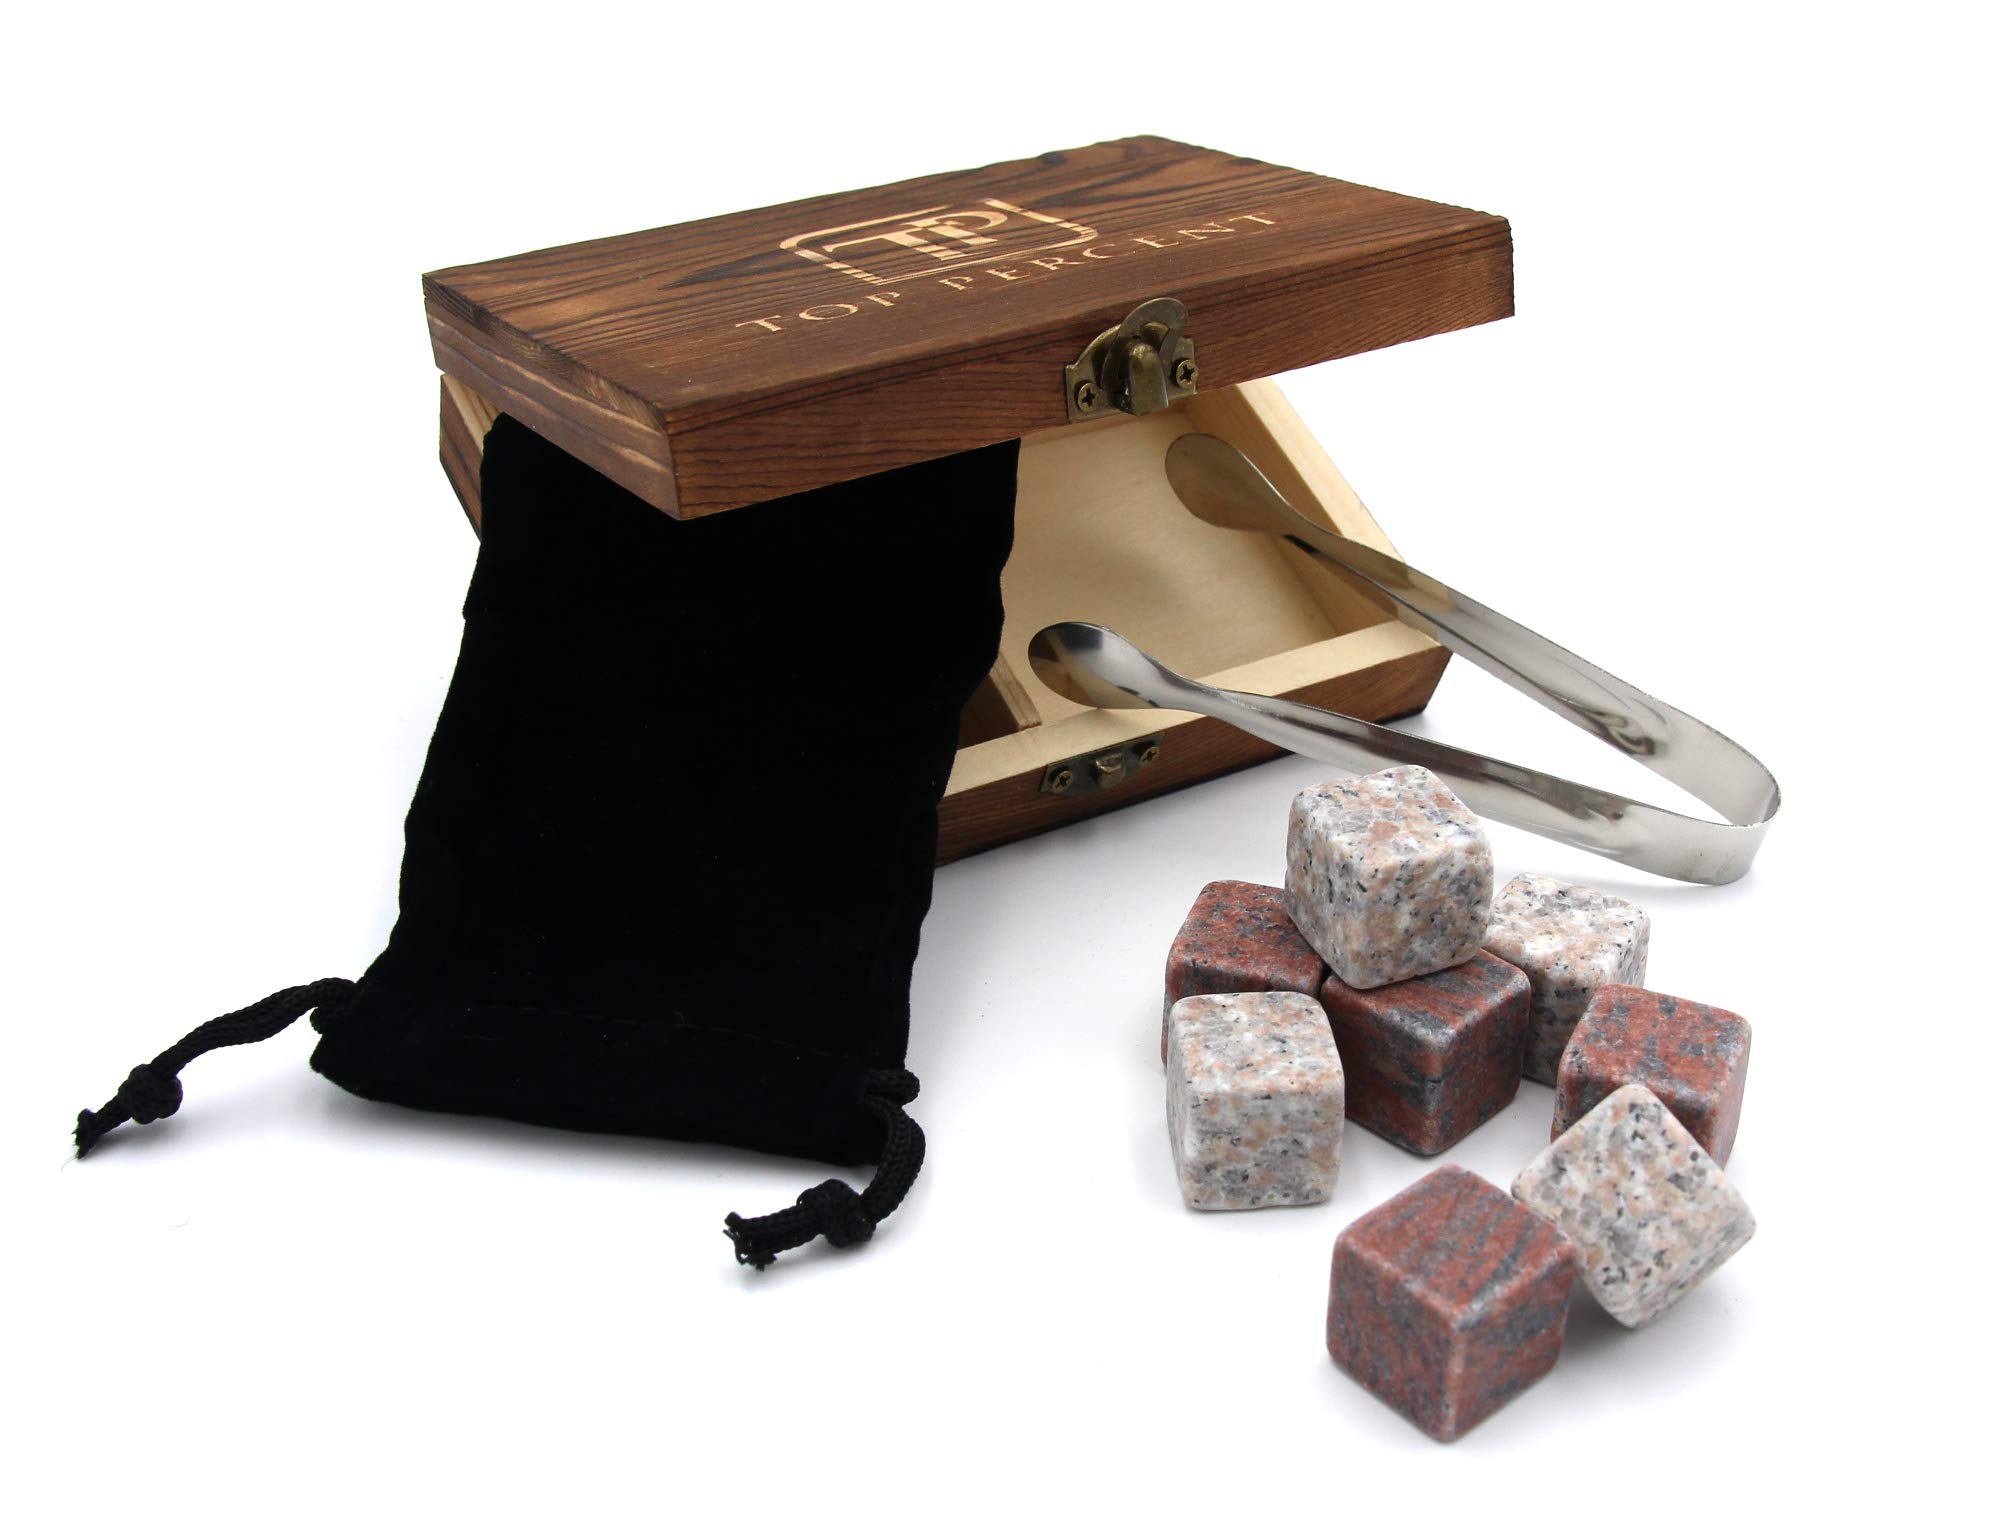 Whiskey Stone Gift Box set with 9 Premium Granite Stones (Won't Water Down Your Drink!), Wood Box, Velvet Carrying Bag and Tongs (Natural Red)